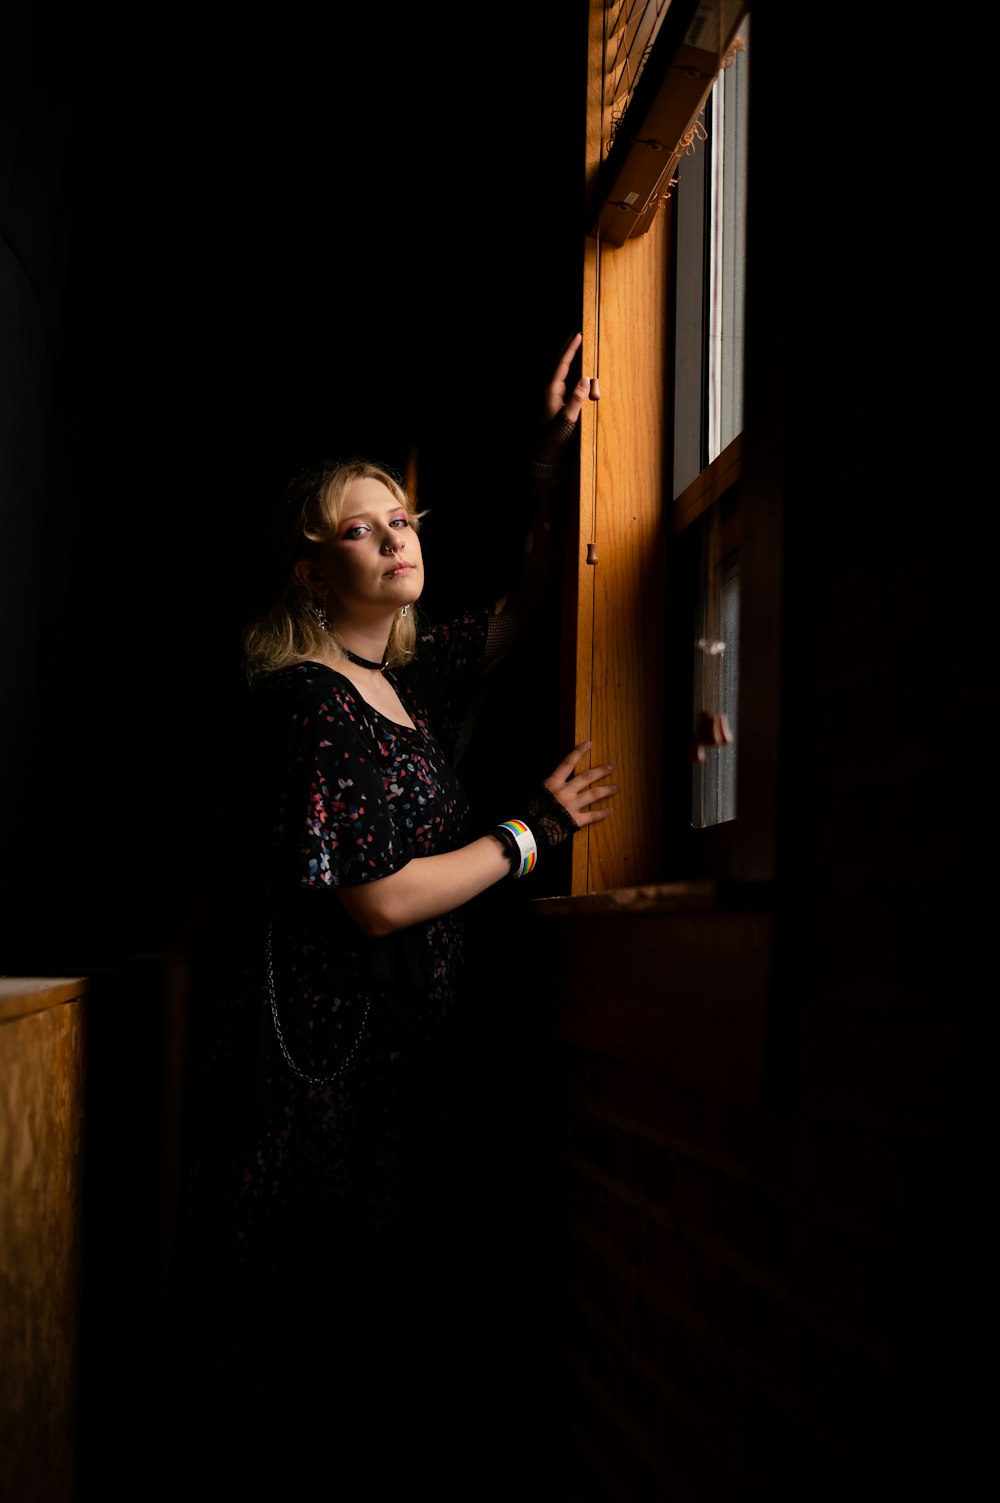 a woman looking out of a window in the dark